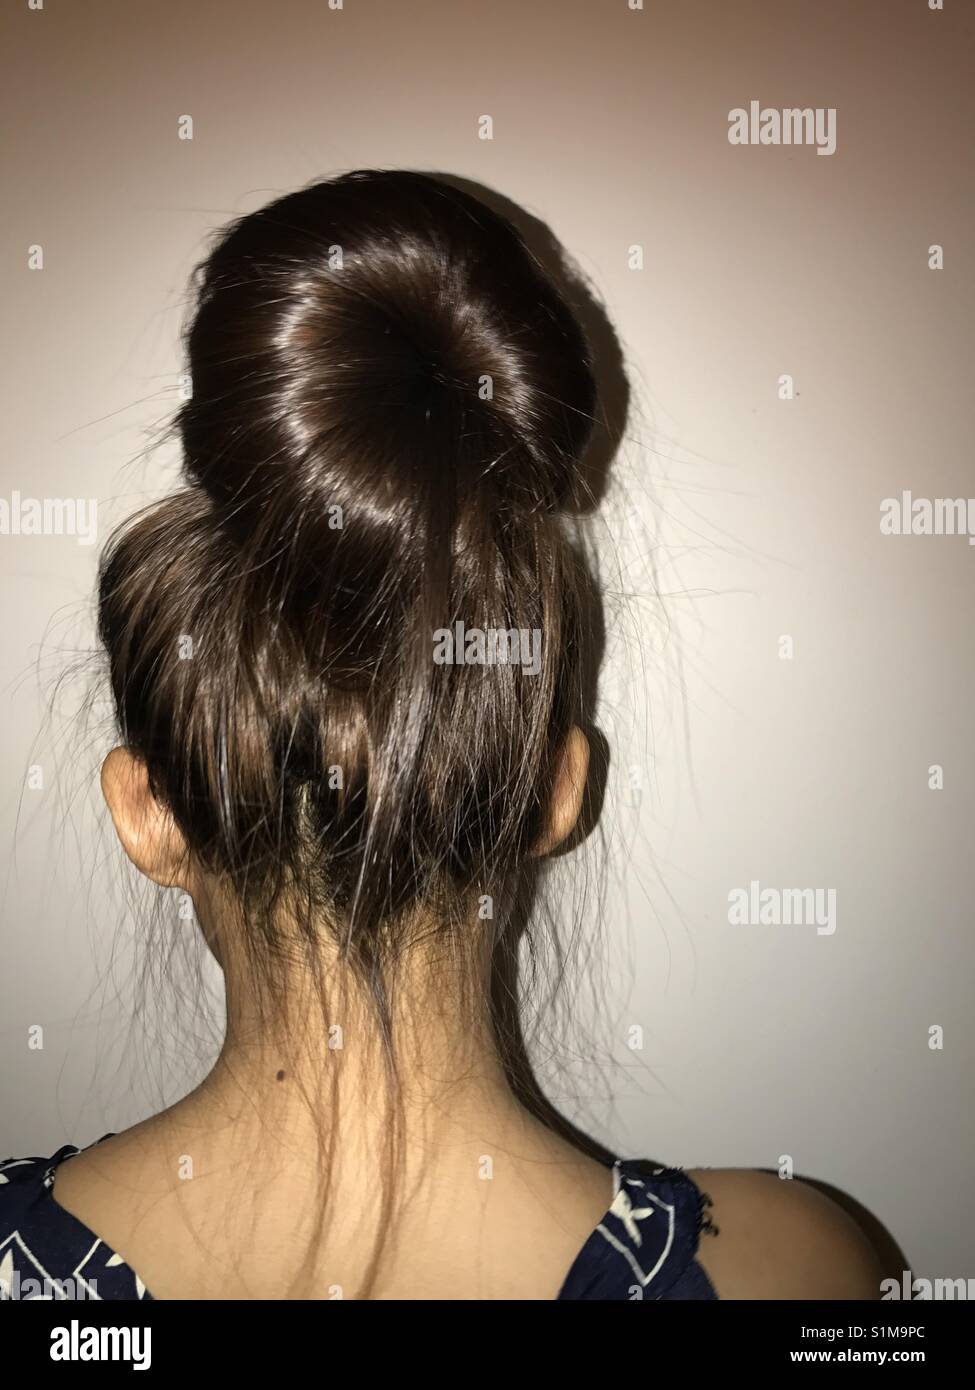 Behind the girl with a messy hair in a bun Stock Photo